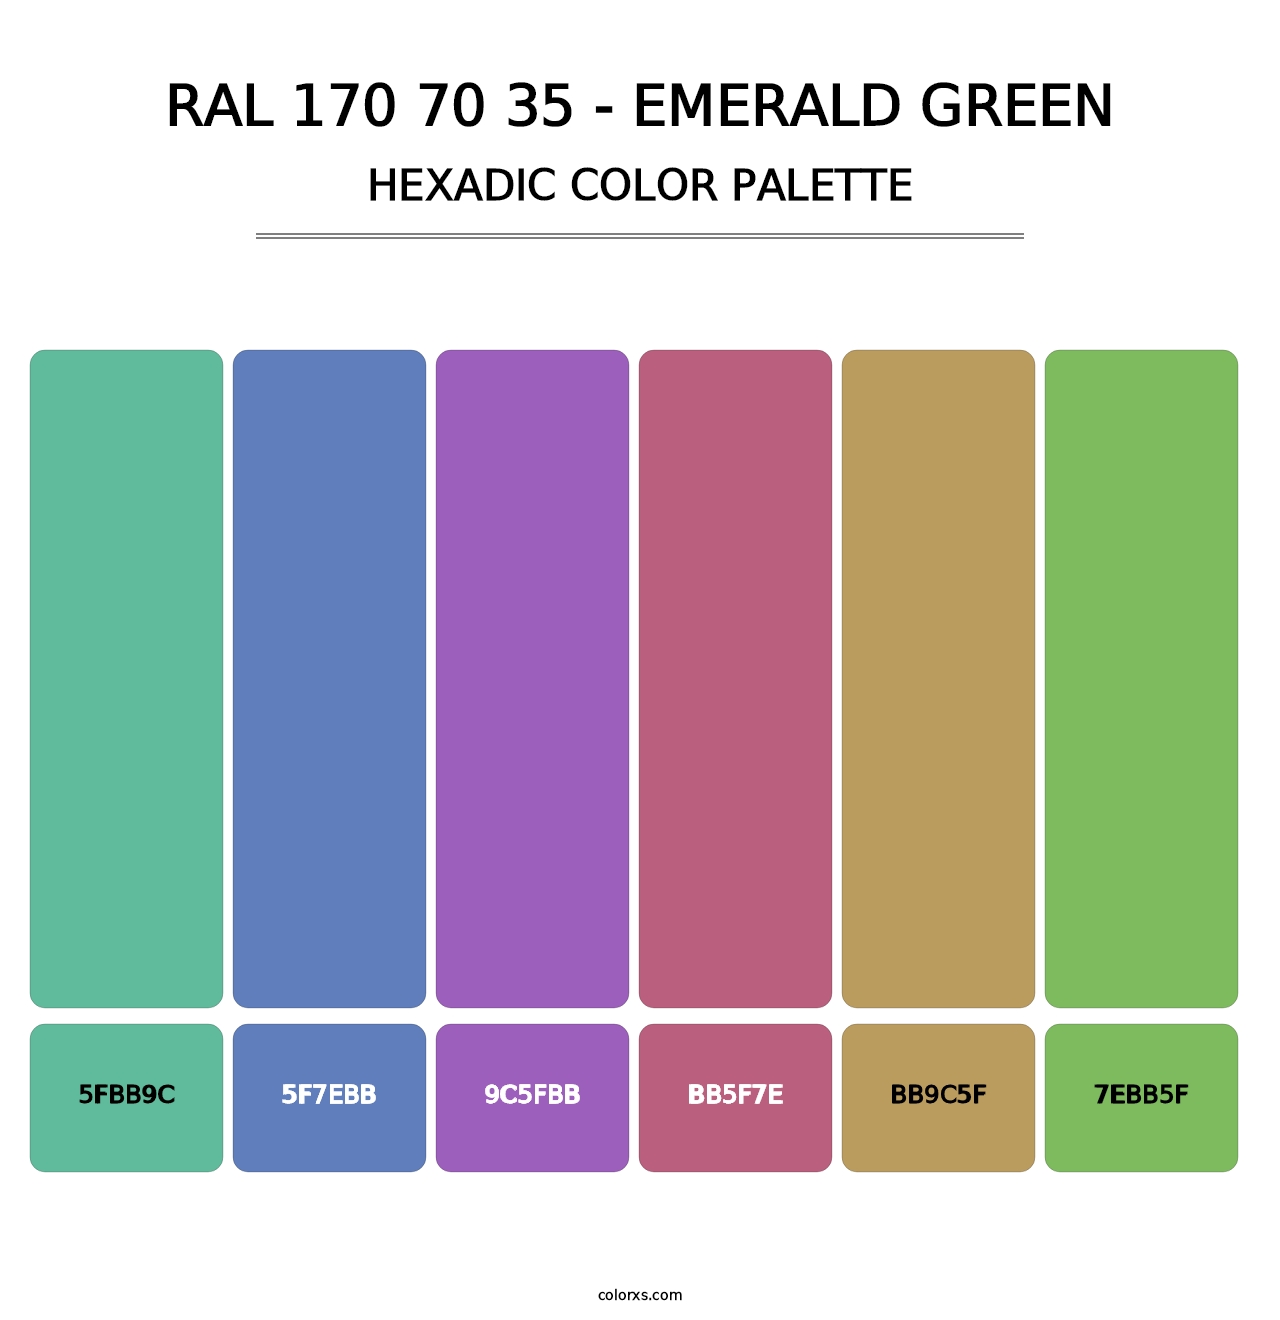 RAL 170 70 35 - Emerald Green - Hexadic Color Palette